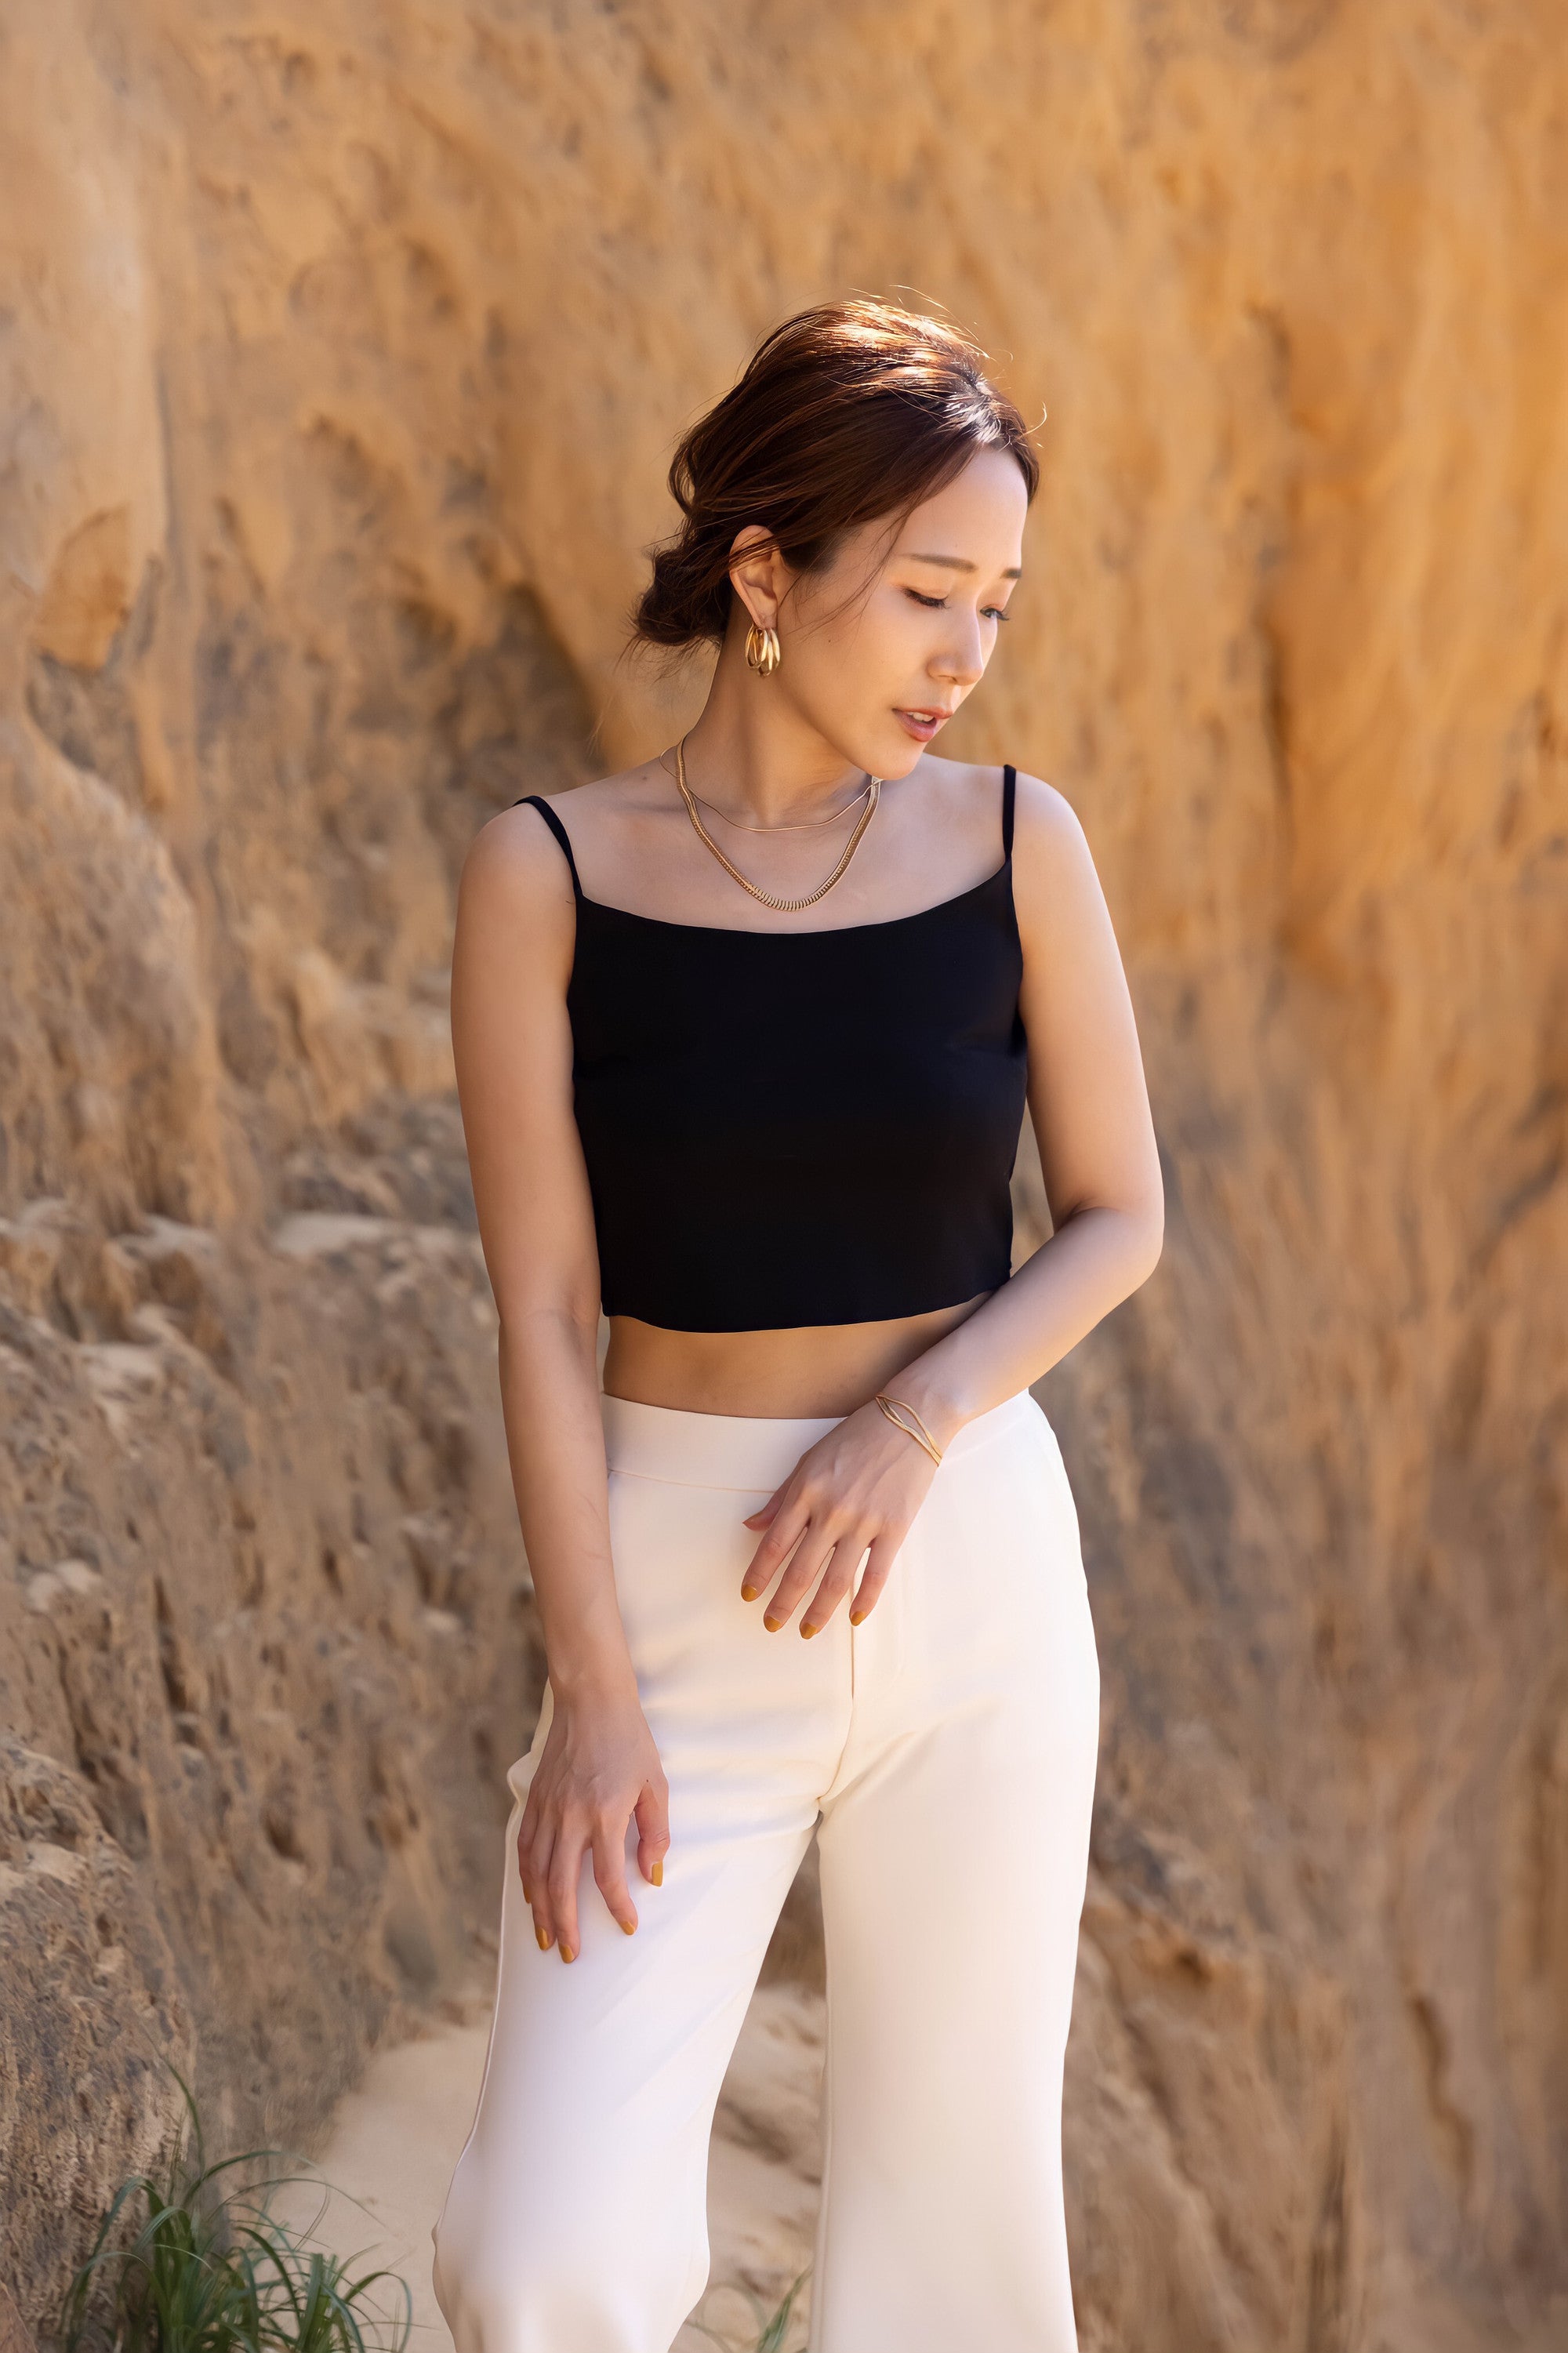 Cropped knit camisole